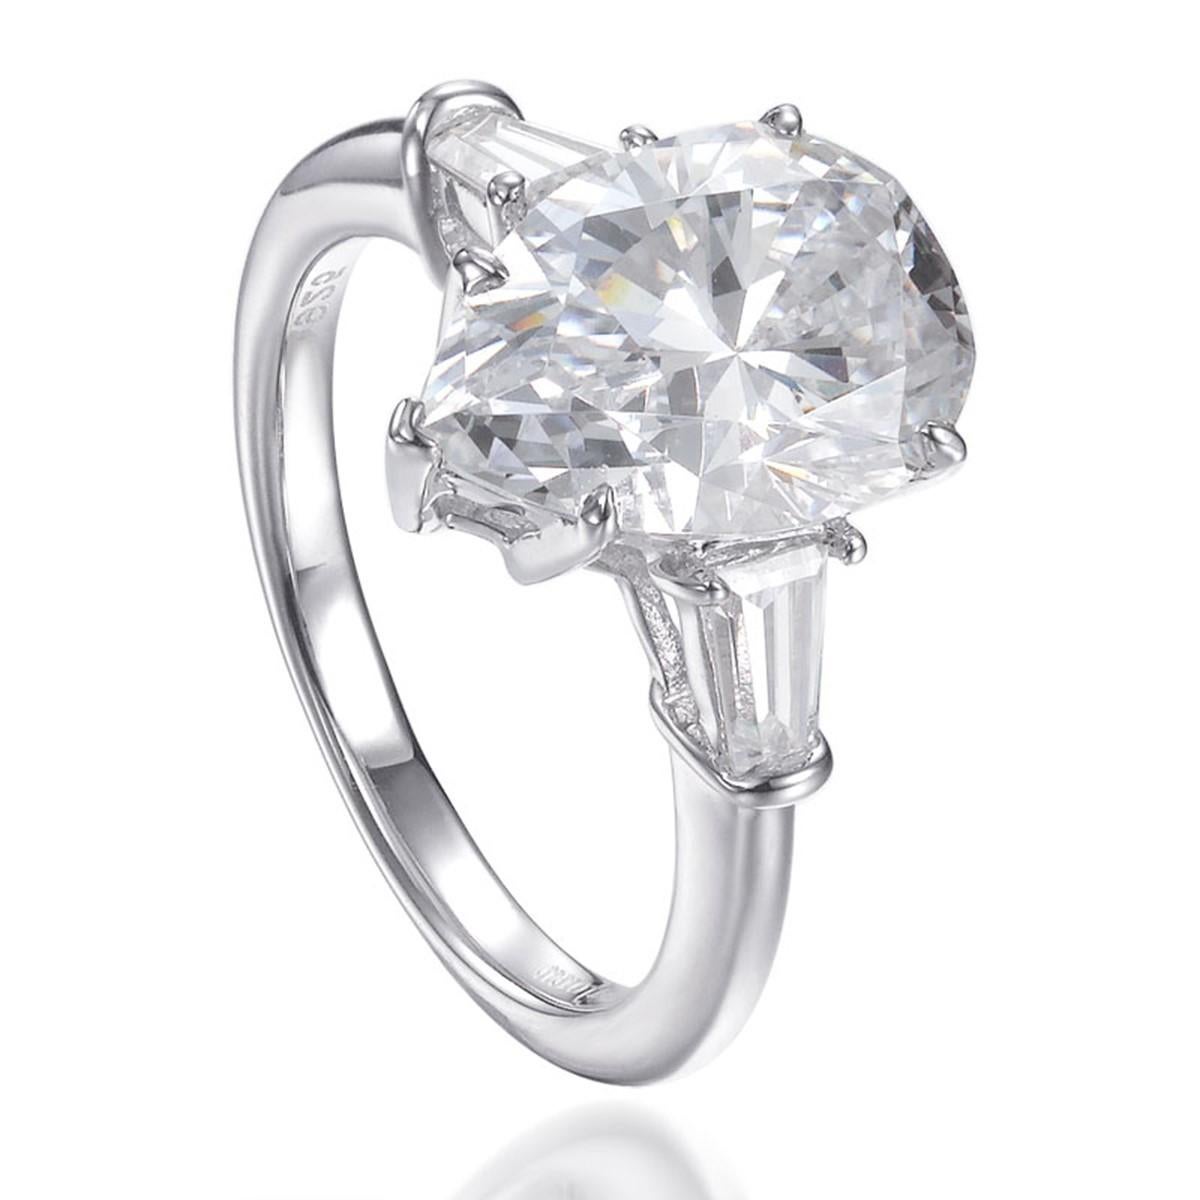 Exceptionally crafted, this classic engagement ring showcases a large 5.05 carat pear shape centre diamond simulant flanked by two beautifully matched tapered baguette cut cubic zirconia, claw set in a 925 sterling silver mount with a high gloss